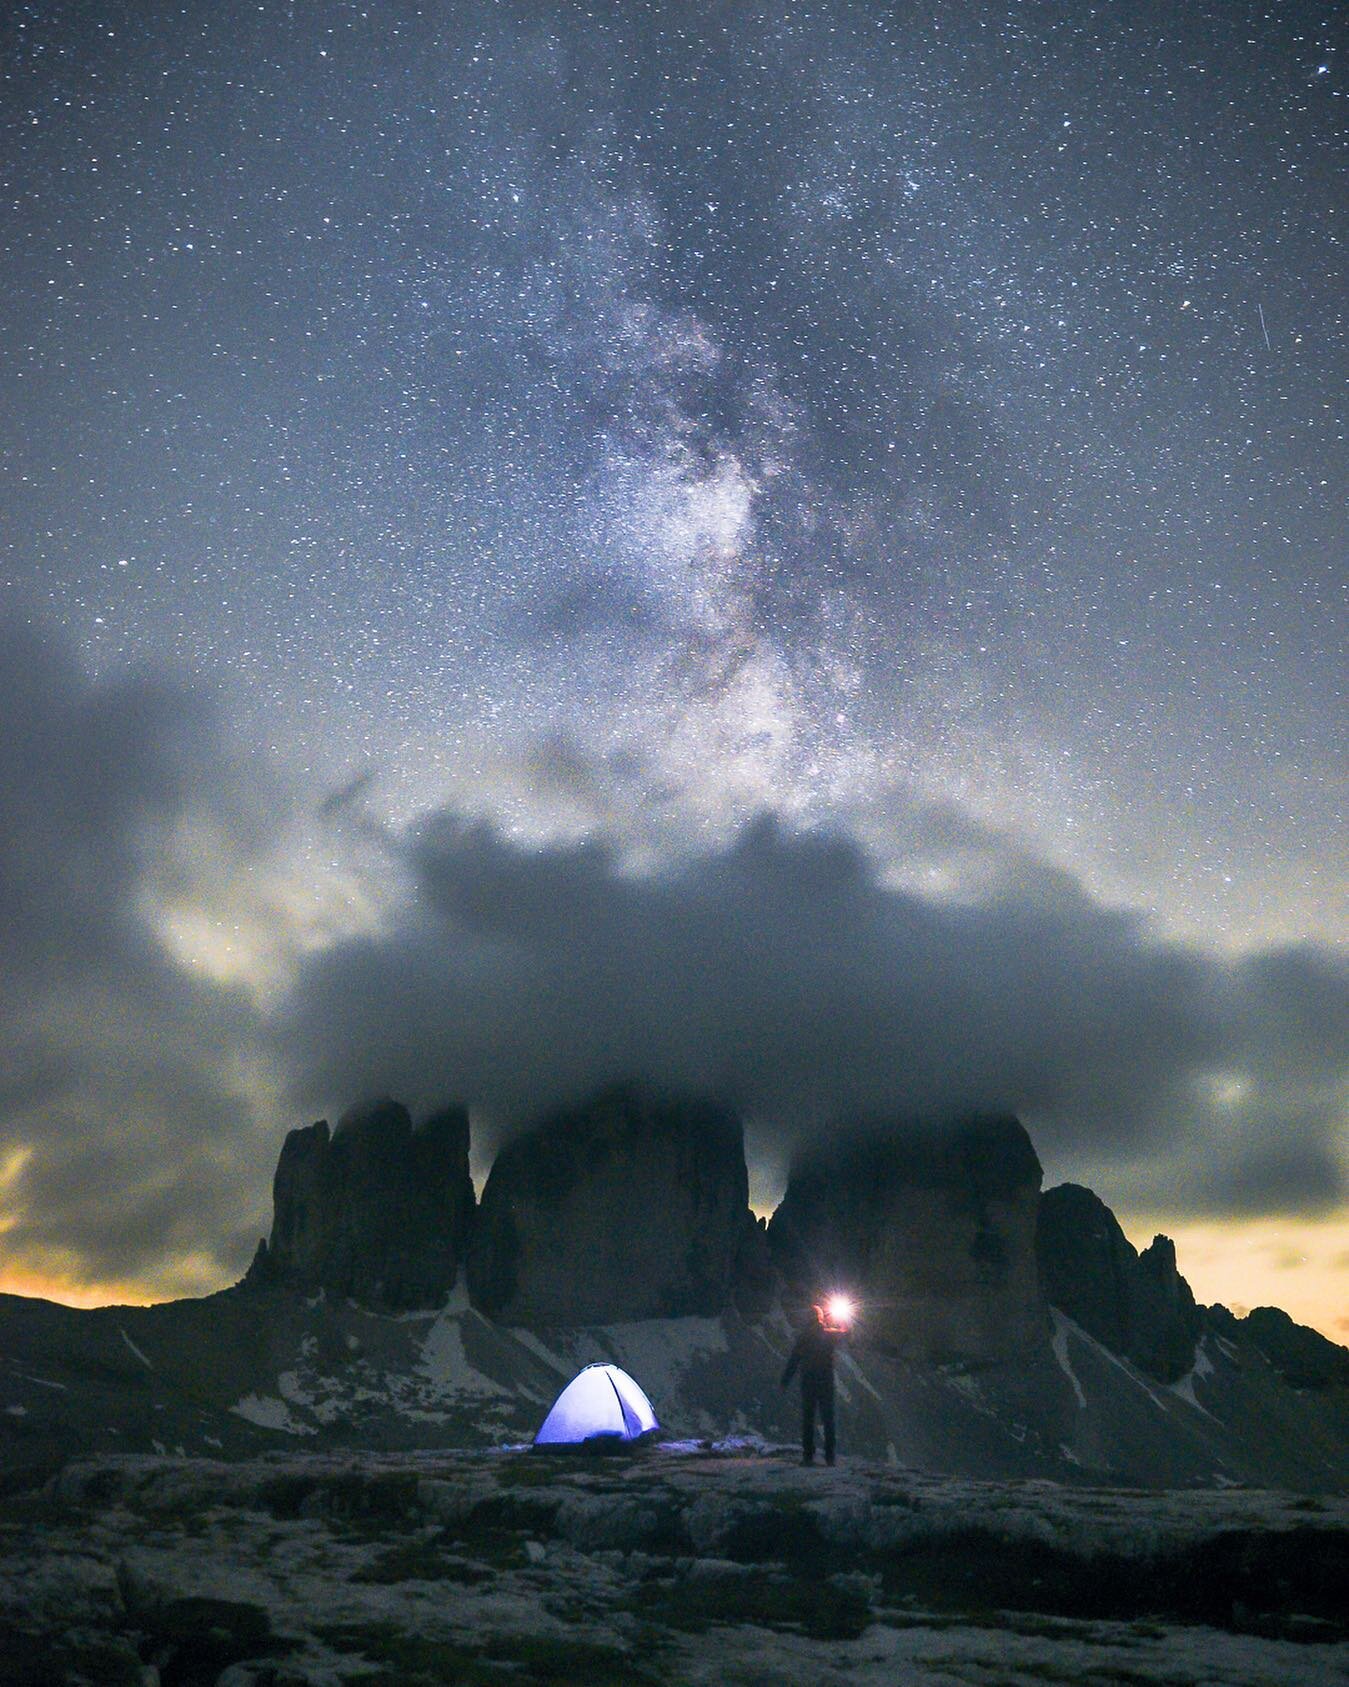 Finally I can tick of this thing from my list. 
Sleeping under the stars and capturing the Milky Way above the tre cime. 
Can&rsquo;t remember when I had such a bad sleep for the last time l, but it was totally worth the hustle. 
My camera only gave 